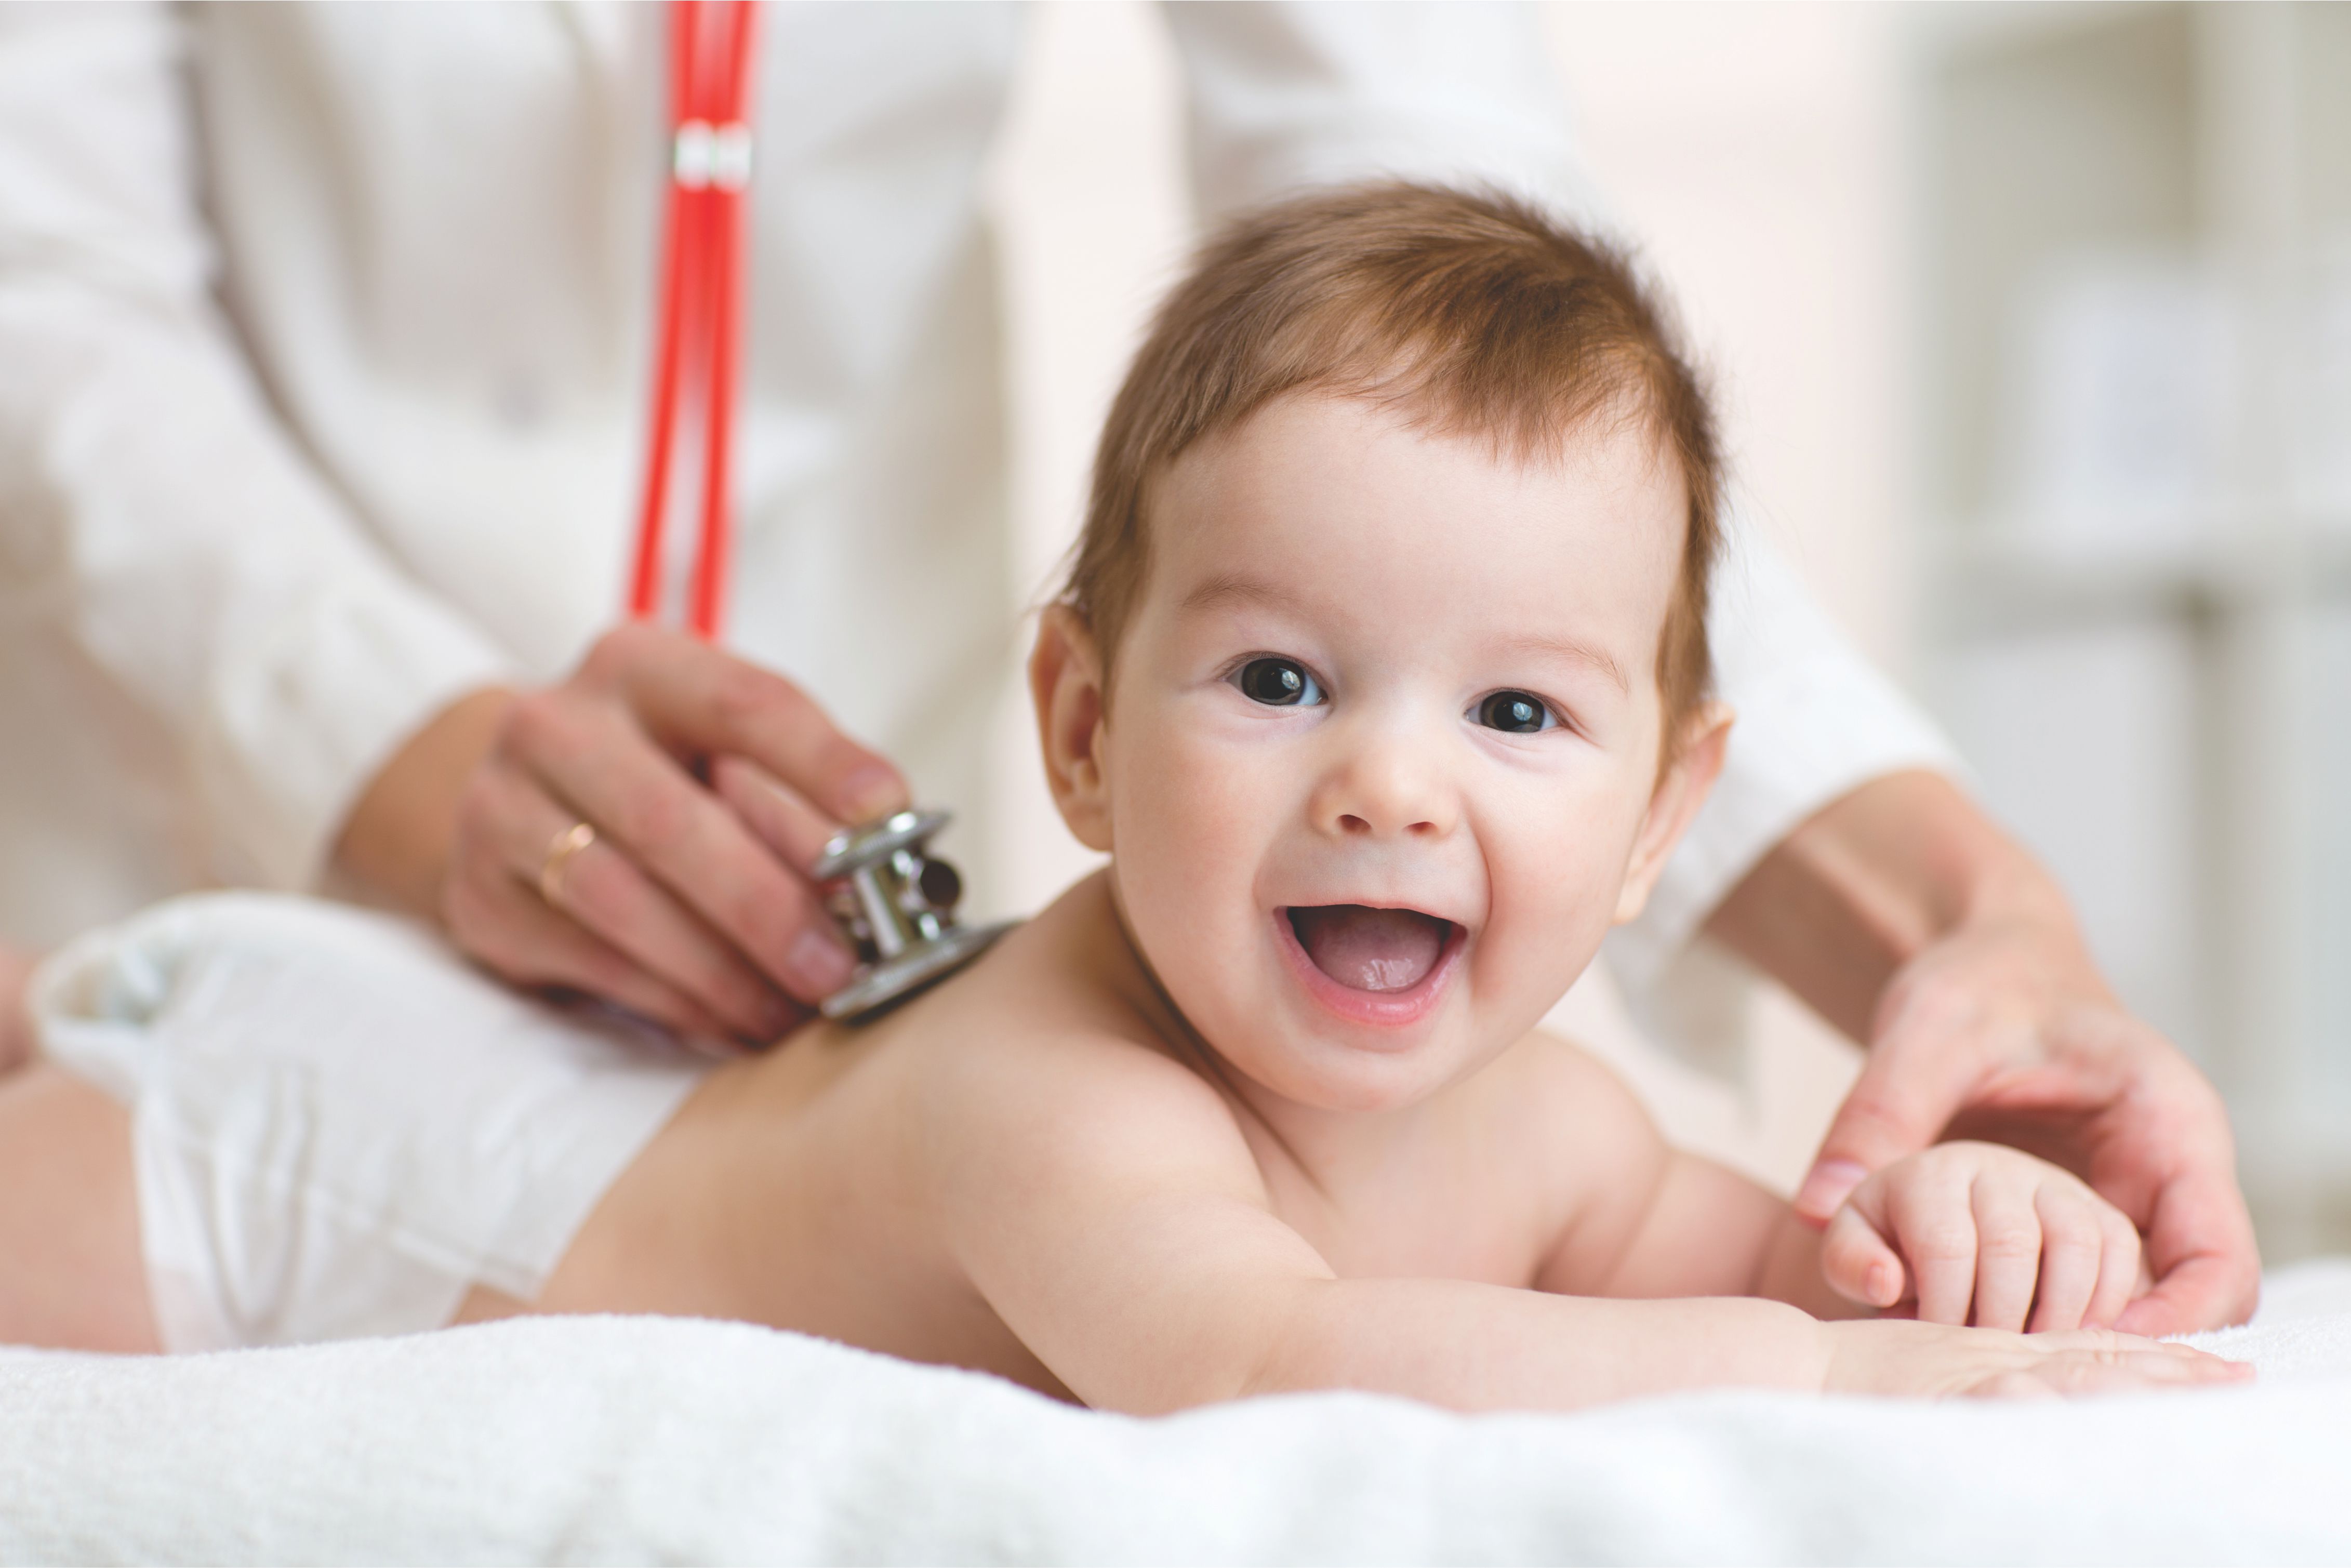 Paediatrics in Turkey is the ultimate place of treatment for your child